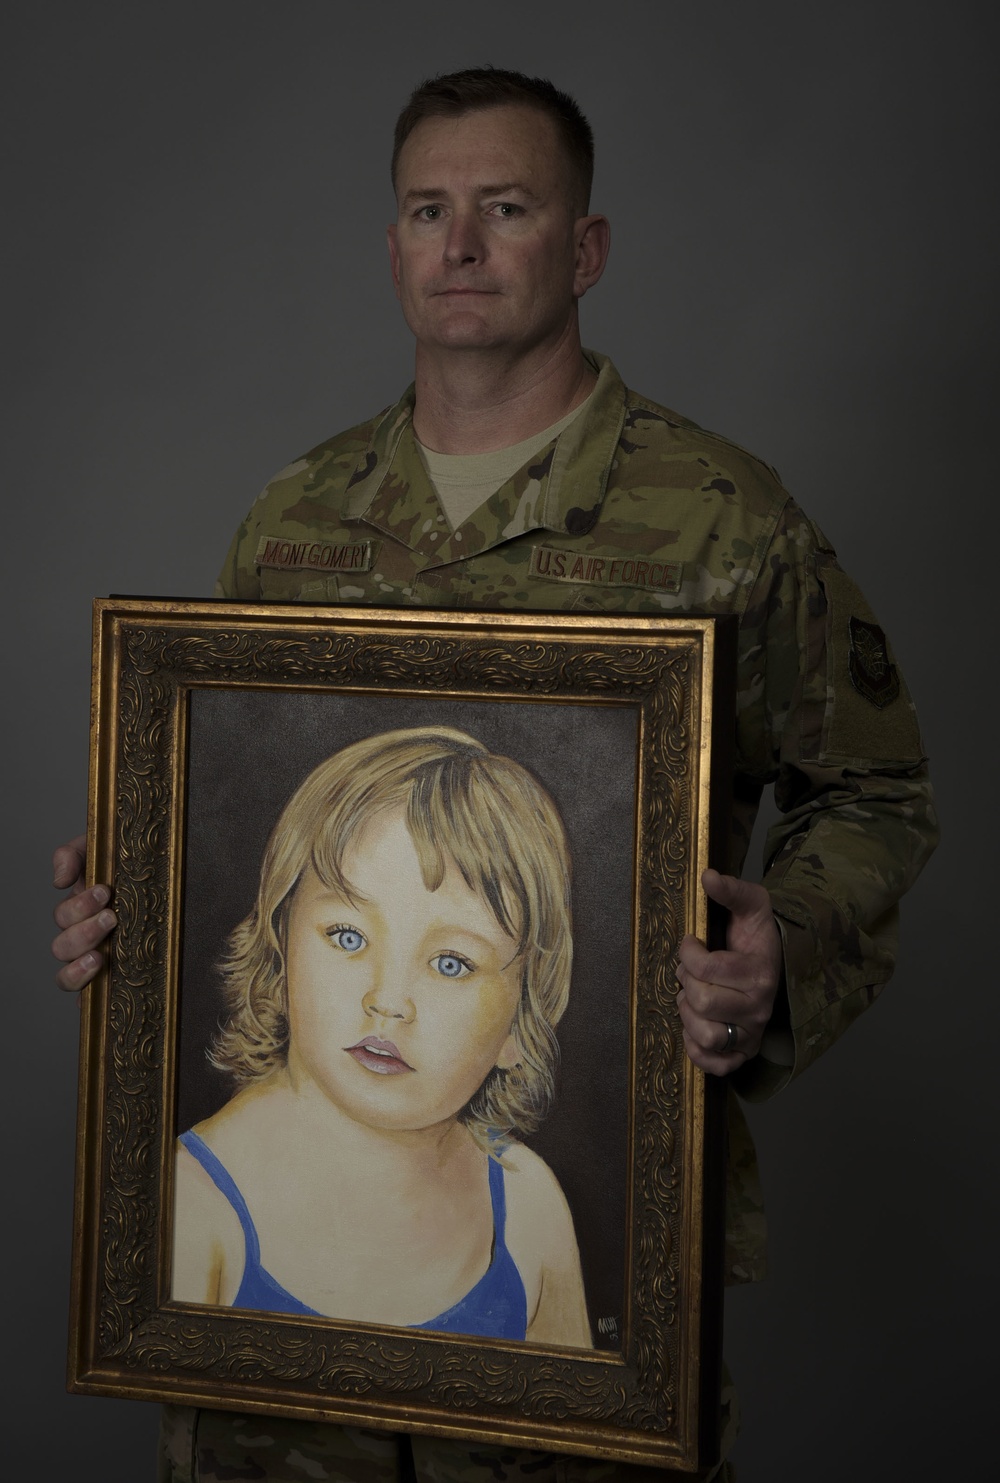 From suffering to success: A story about a first sergeant’s recovery from tragedy